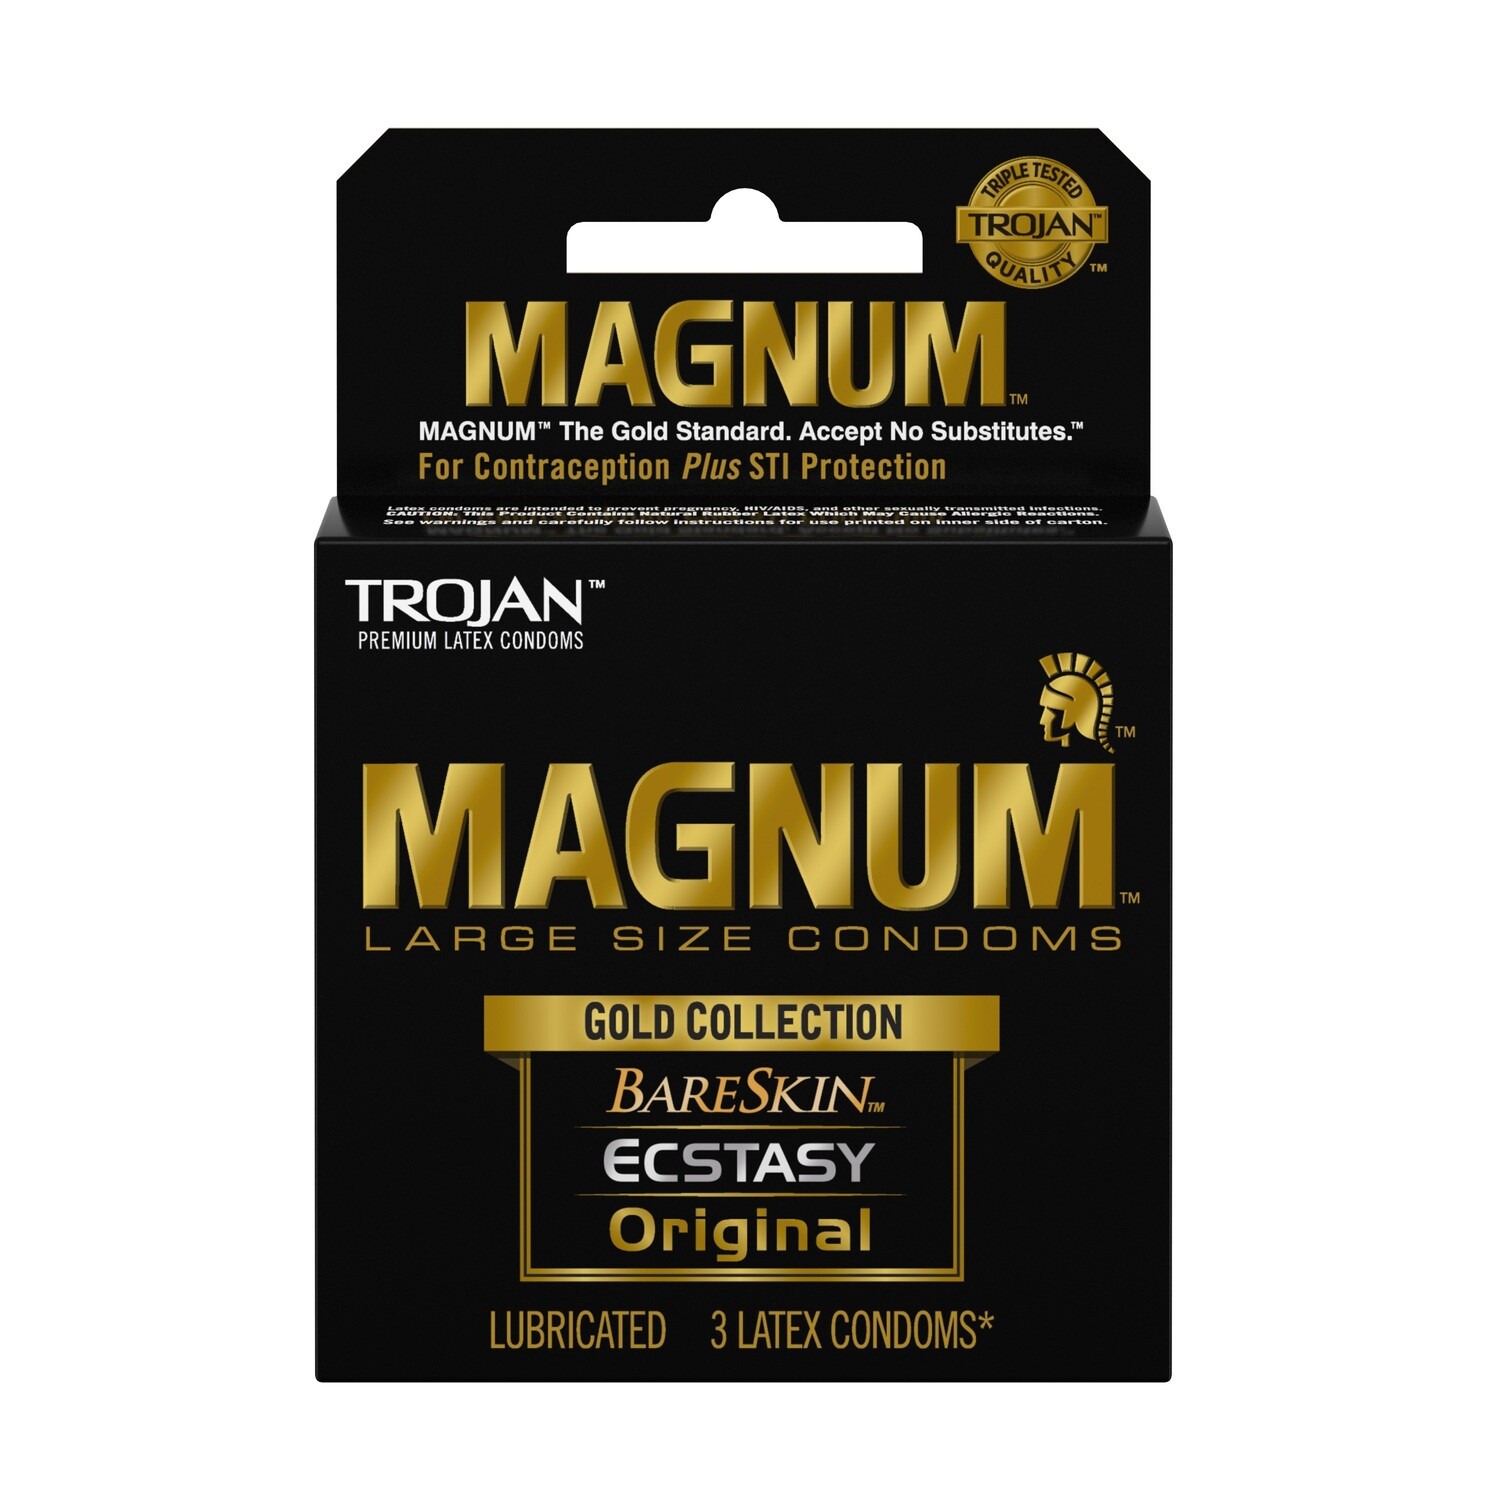 TROJAN: Magnum Large Size Gold Collection Condoms - 3 Pack